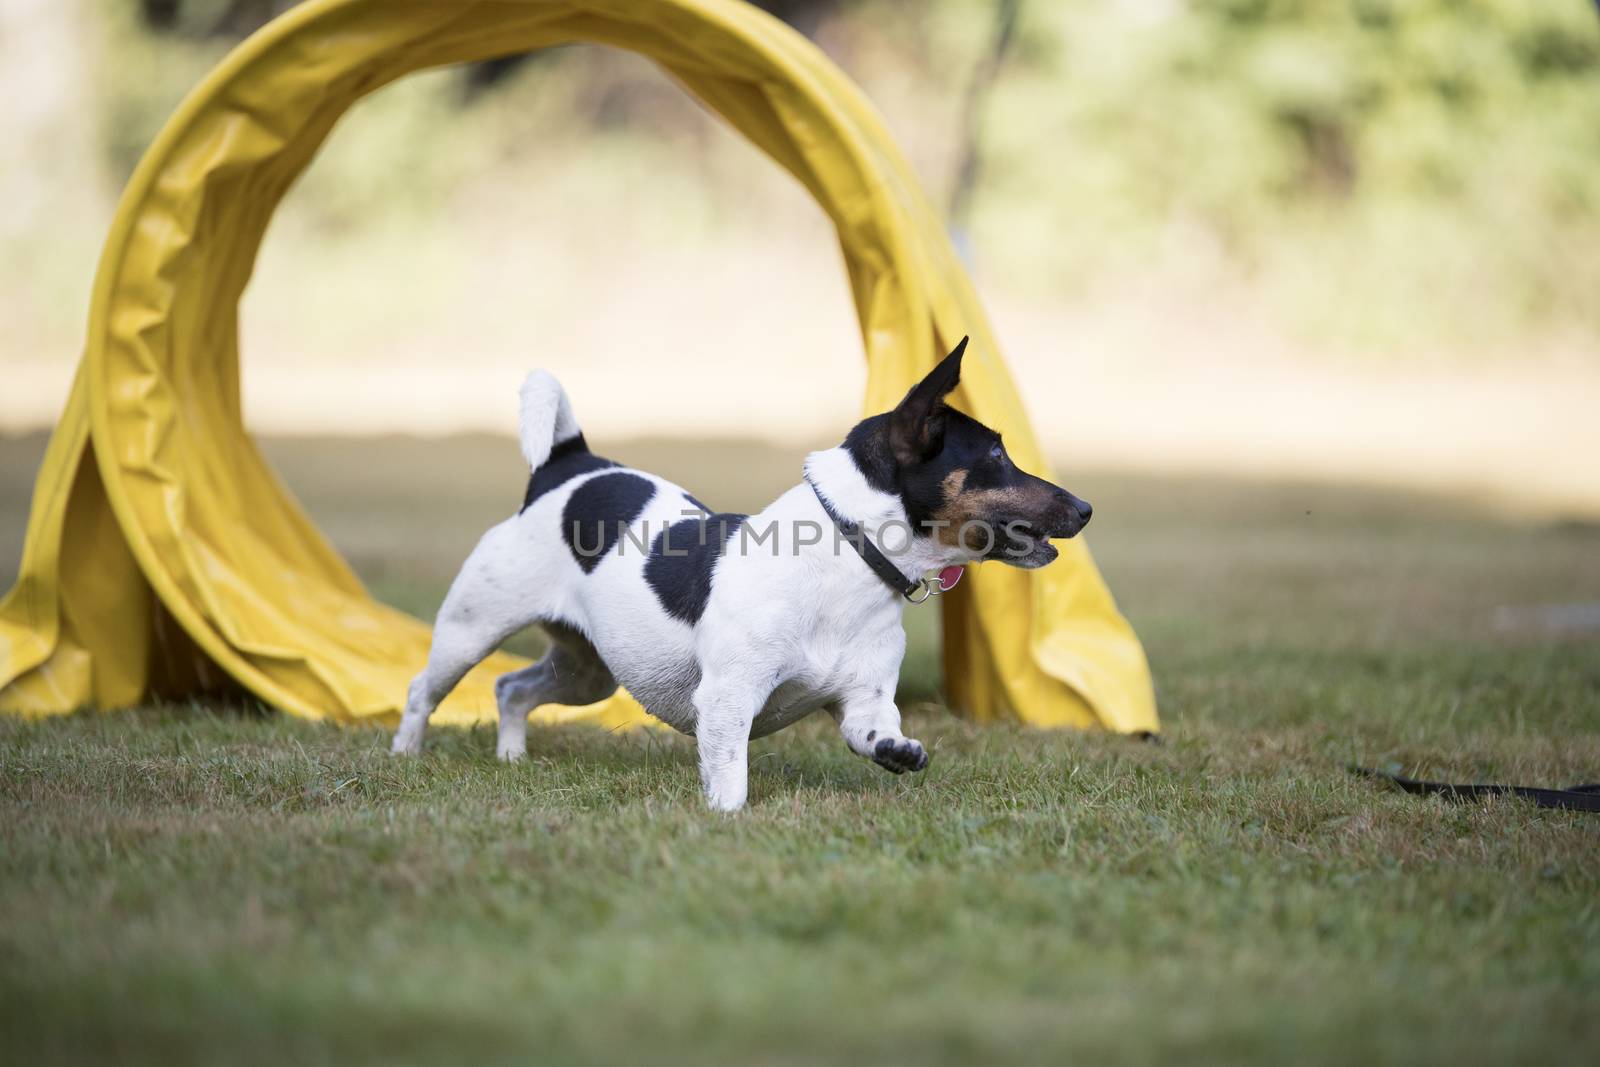 Dog, Jack Russell Terrier, running through agility tunnel by avanheertum